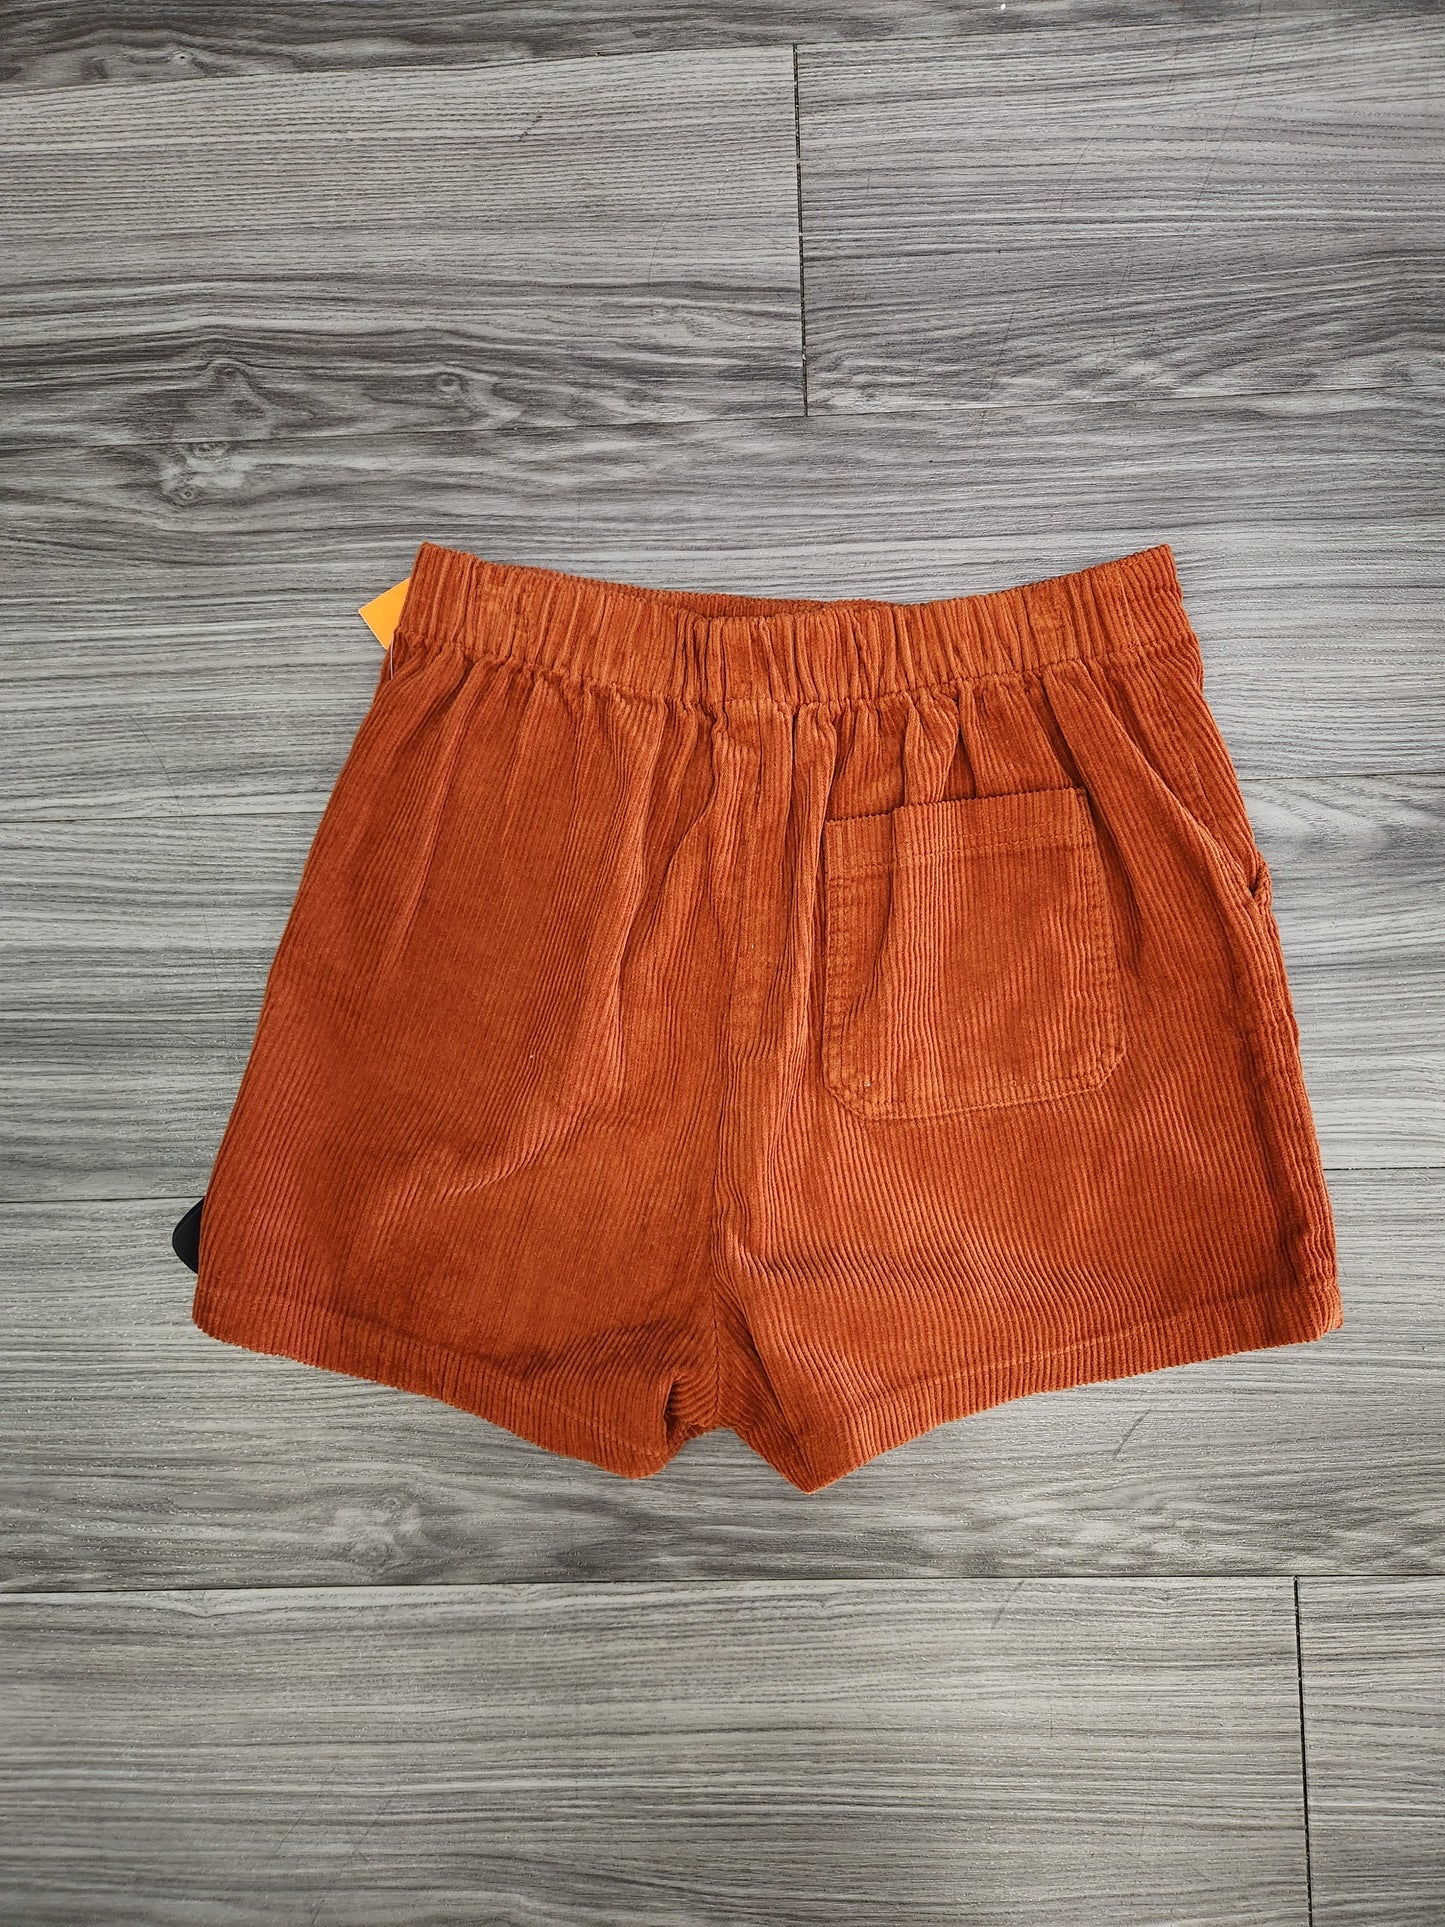 Shorts By Wild Fable  Size: S